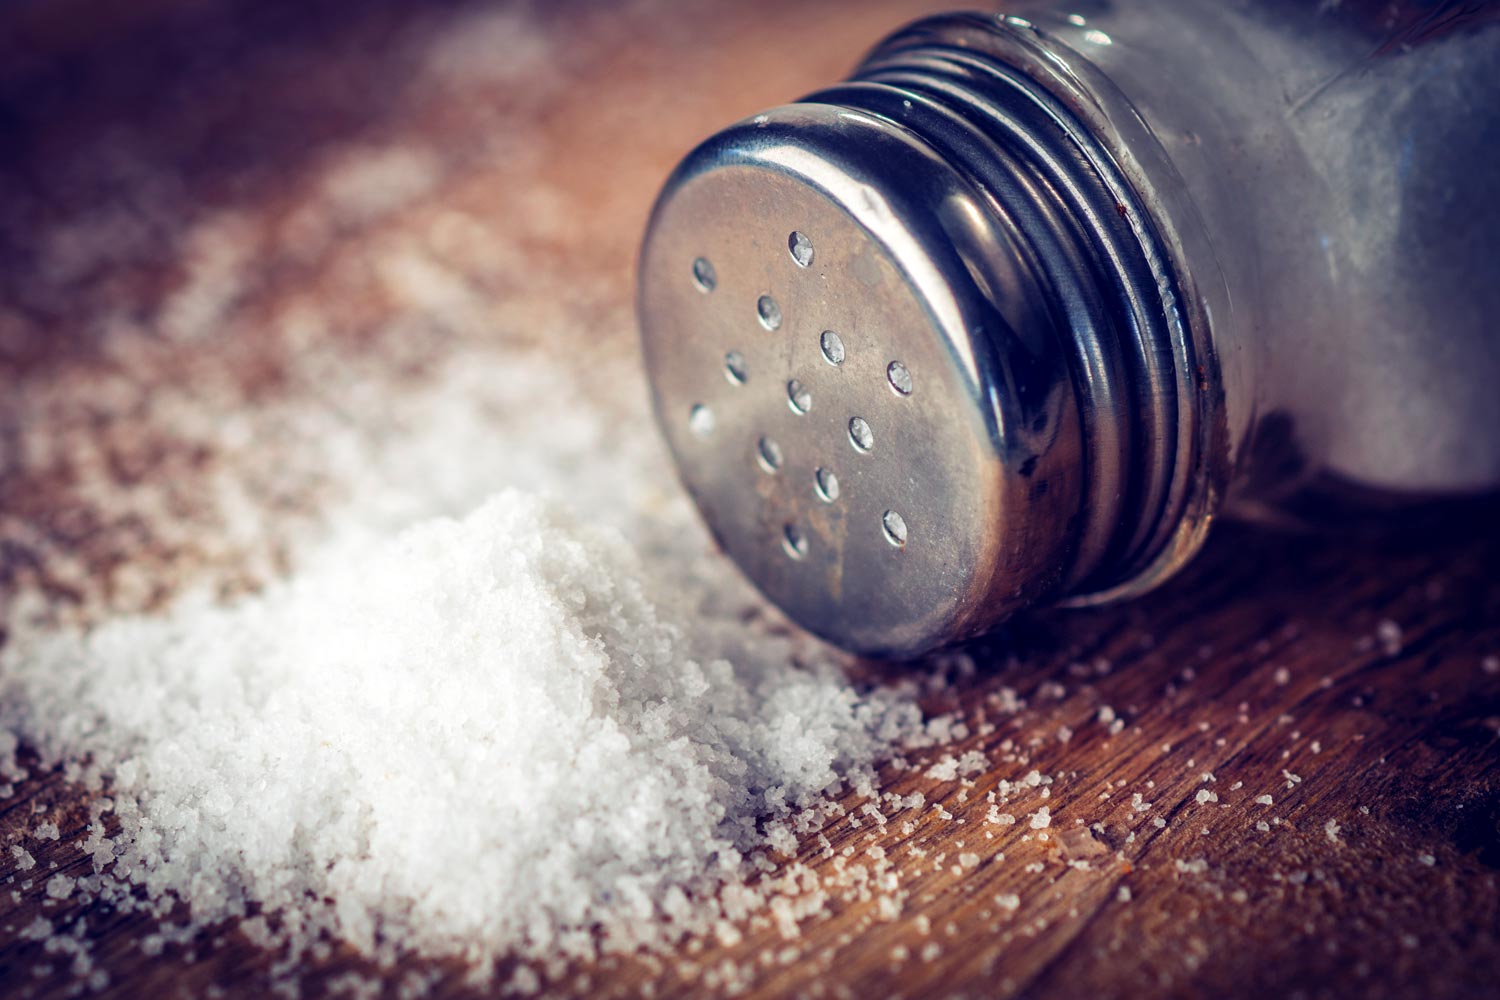 Salt piled on a table with a salt shaker on its side.